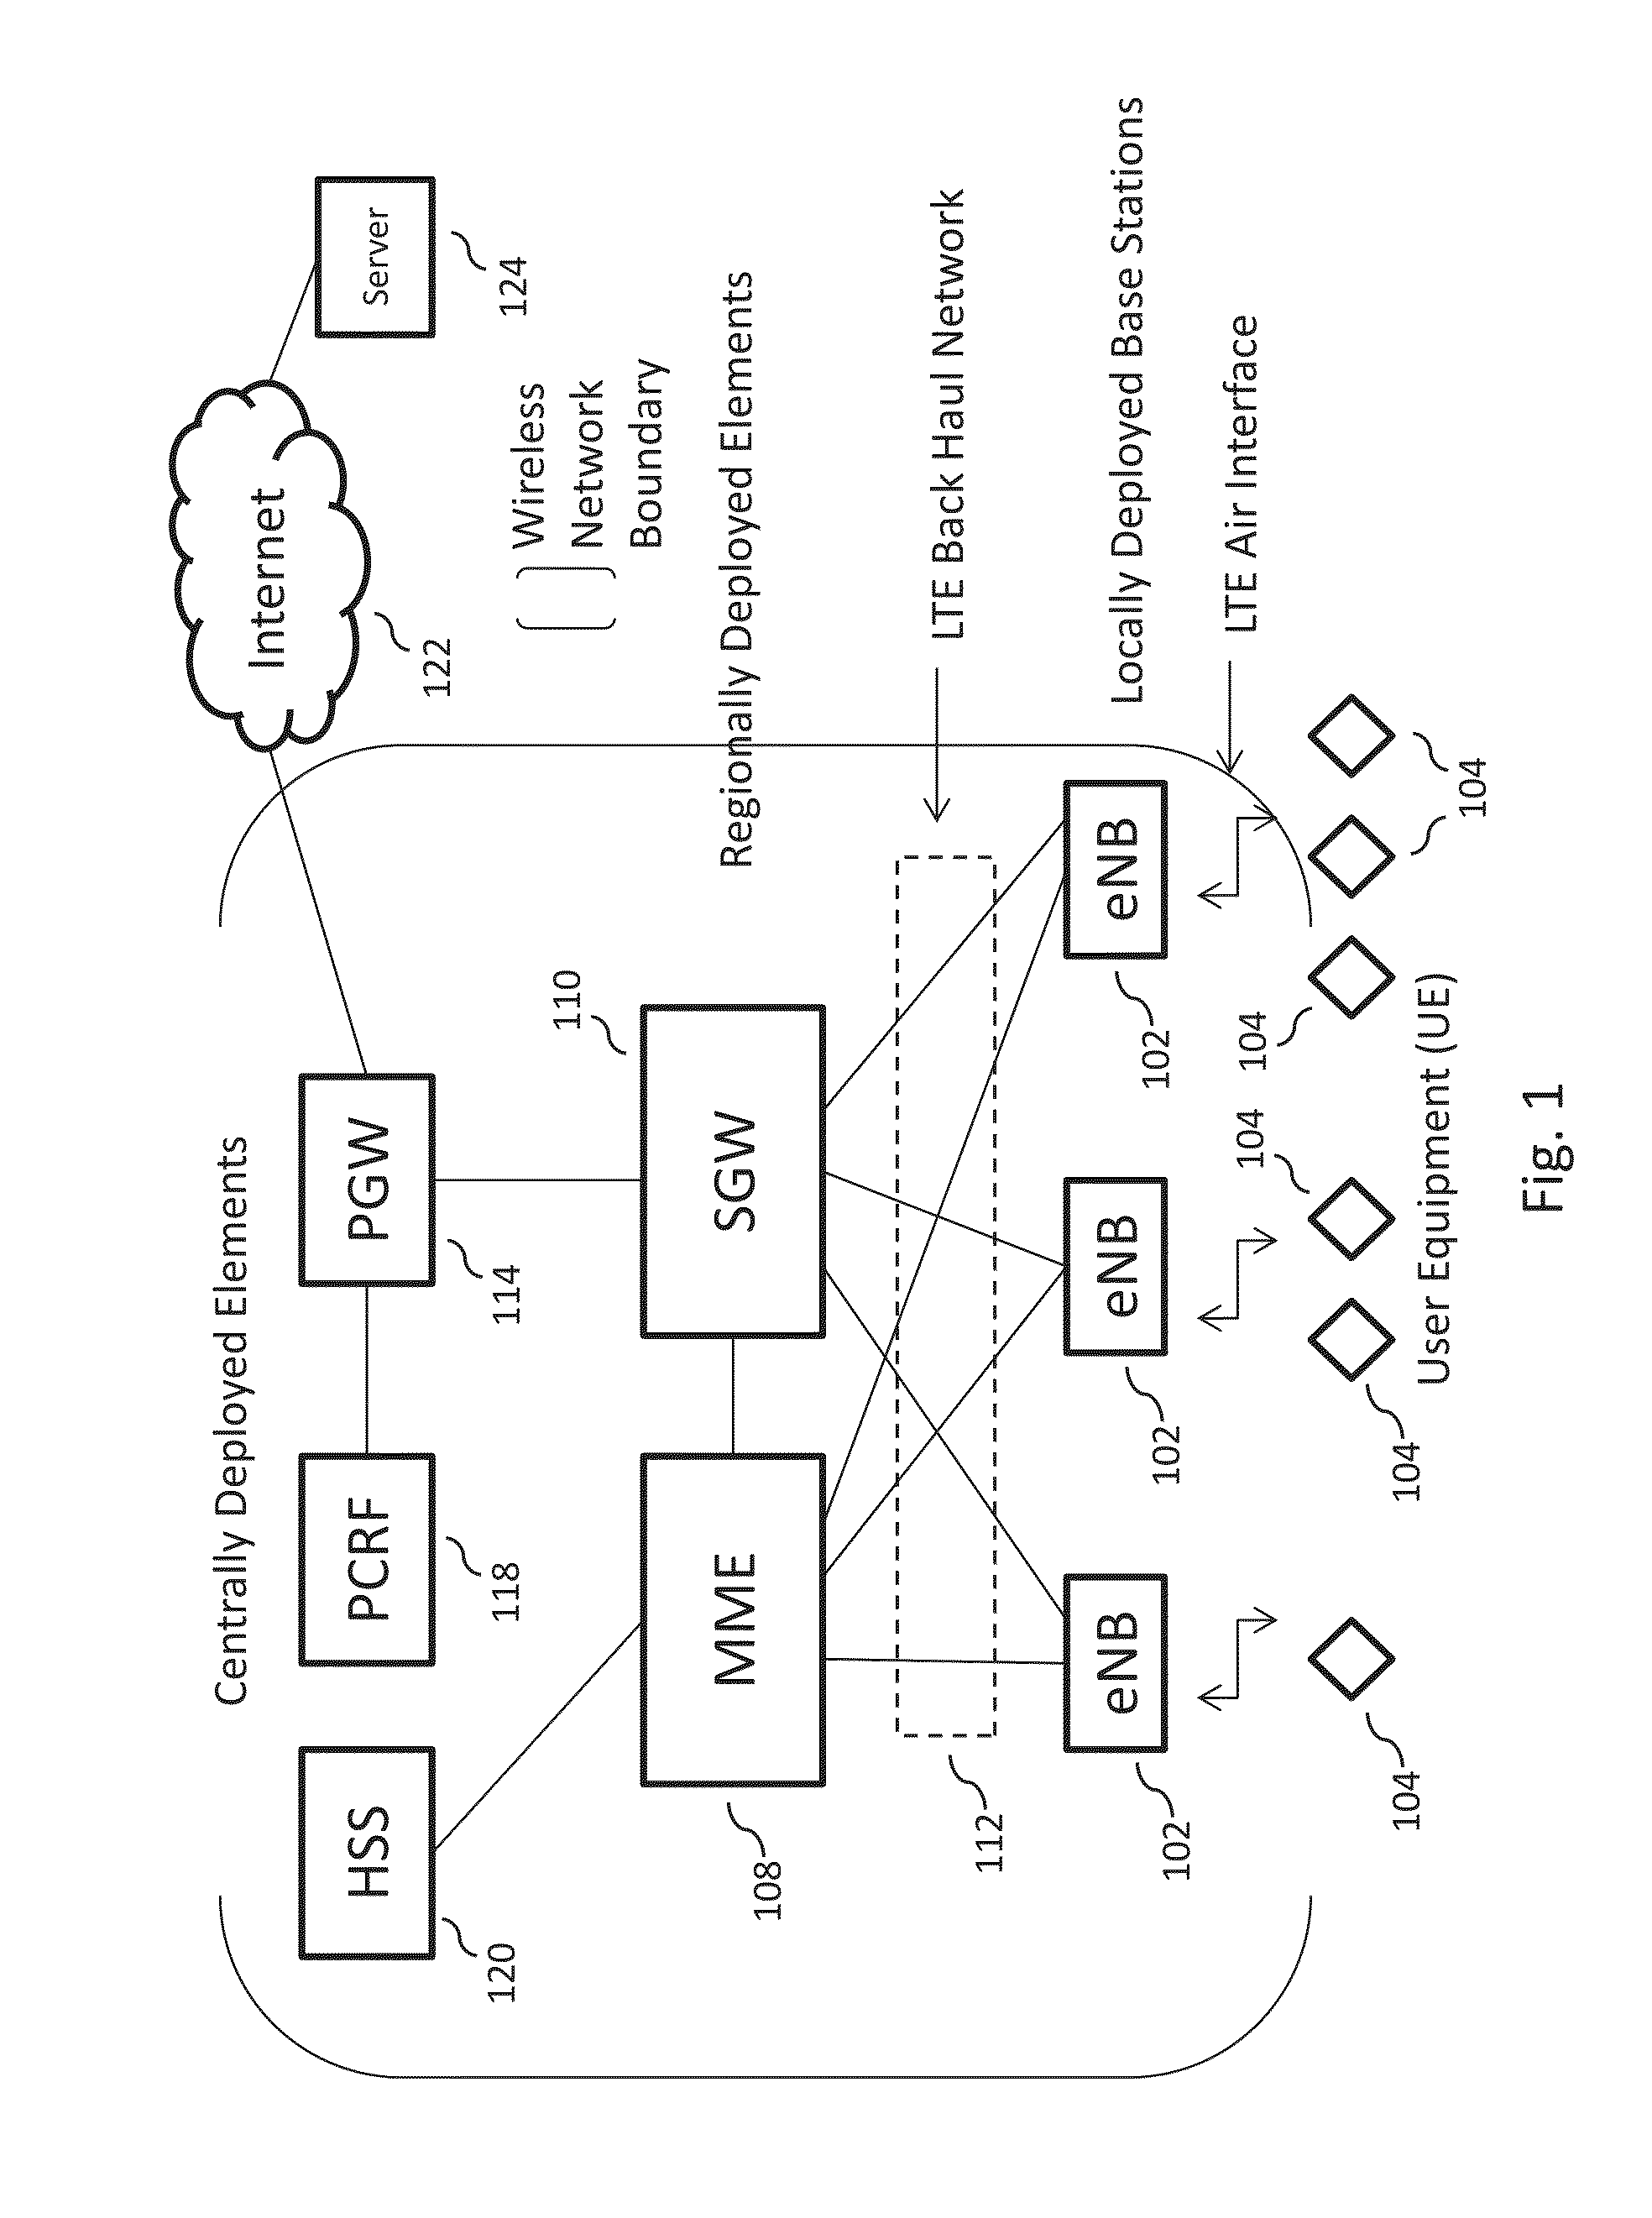 Efficient delivery of real-time synchronous services over a wireless network